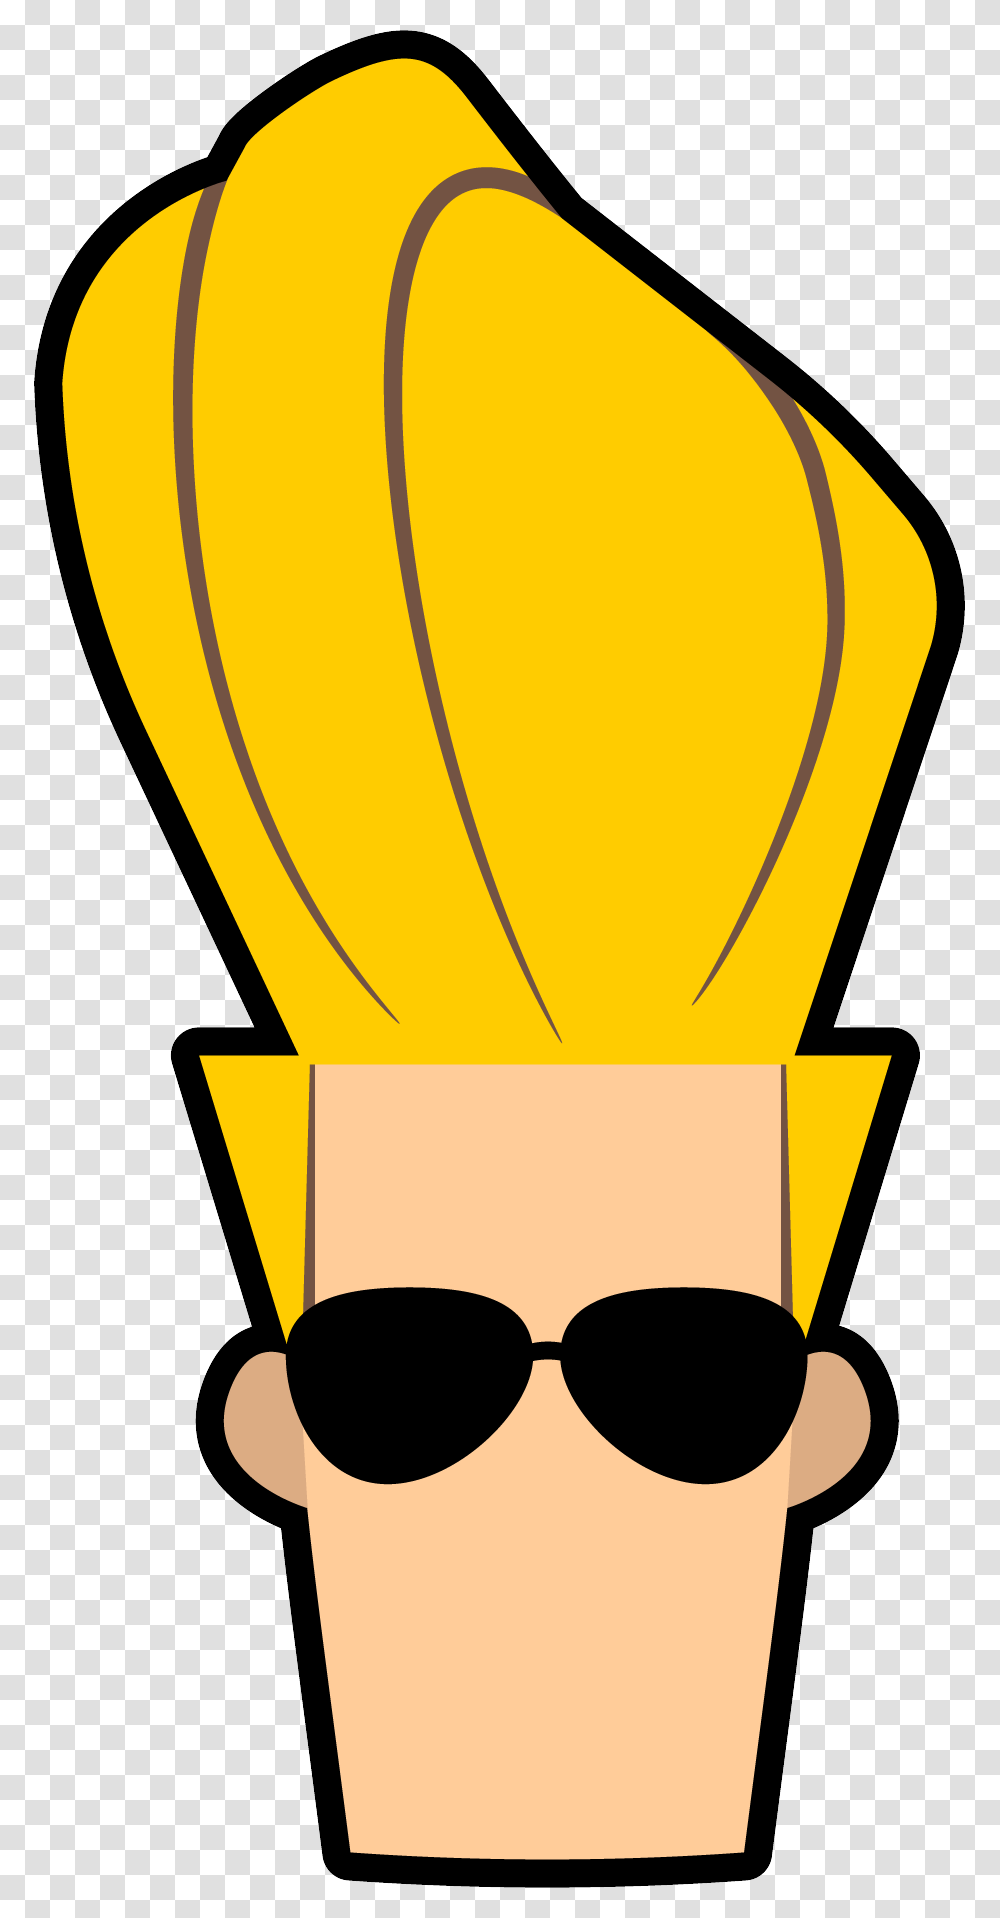 Siivagunner Wiki, Sunglasses, Accessories, Accessory, Hot Air Balloon Transparent Png